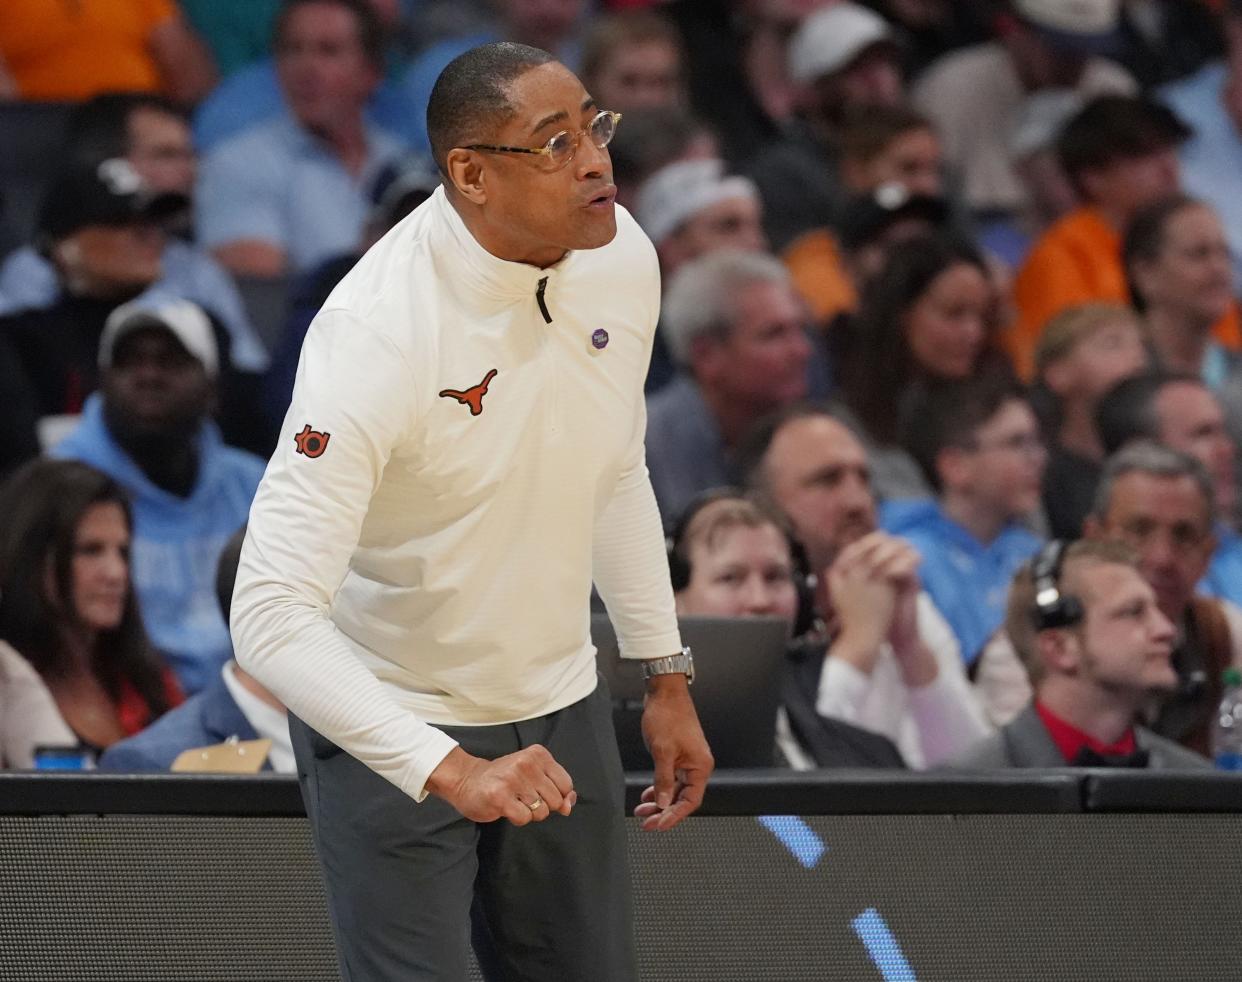 Texas coach Rodney Terry is at the Longhorn women's game against Alabama. He's lamenting Texas' near-upset of Tennessee in Saturday's second round game. The Horns finished the season at 21-13.